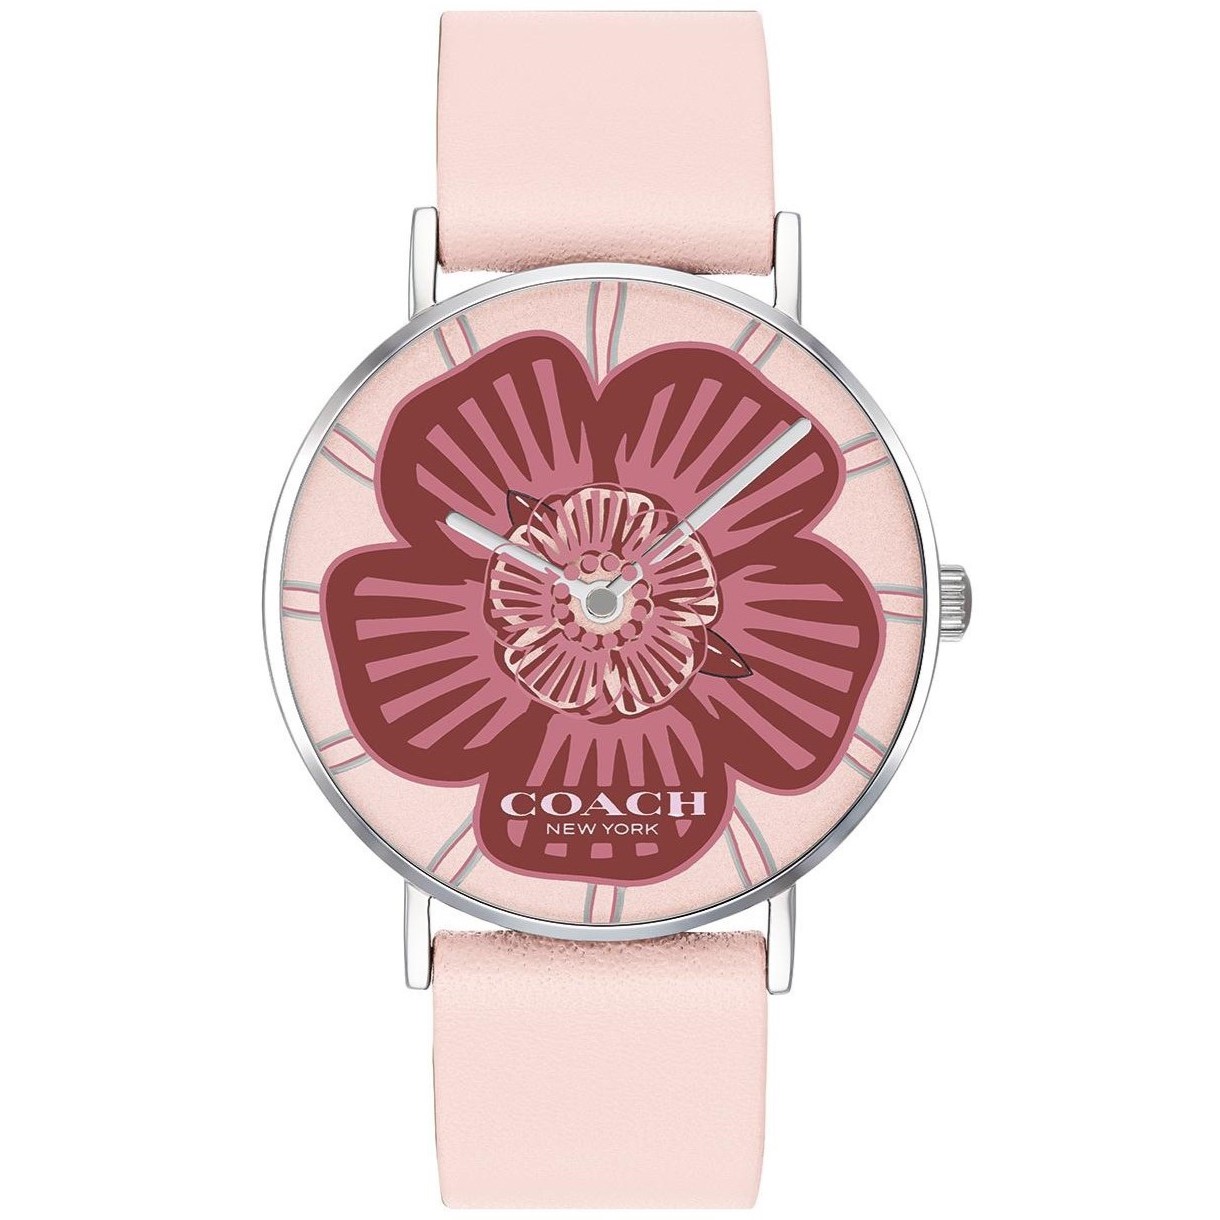 ĐỒNG HỒ ĐEO TAY COACH PERRY QUARTZ PINK FLORAL DIAL LADIES WATCH 14503231 4